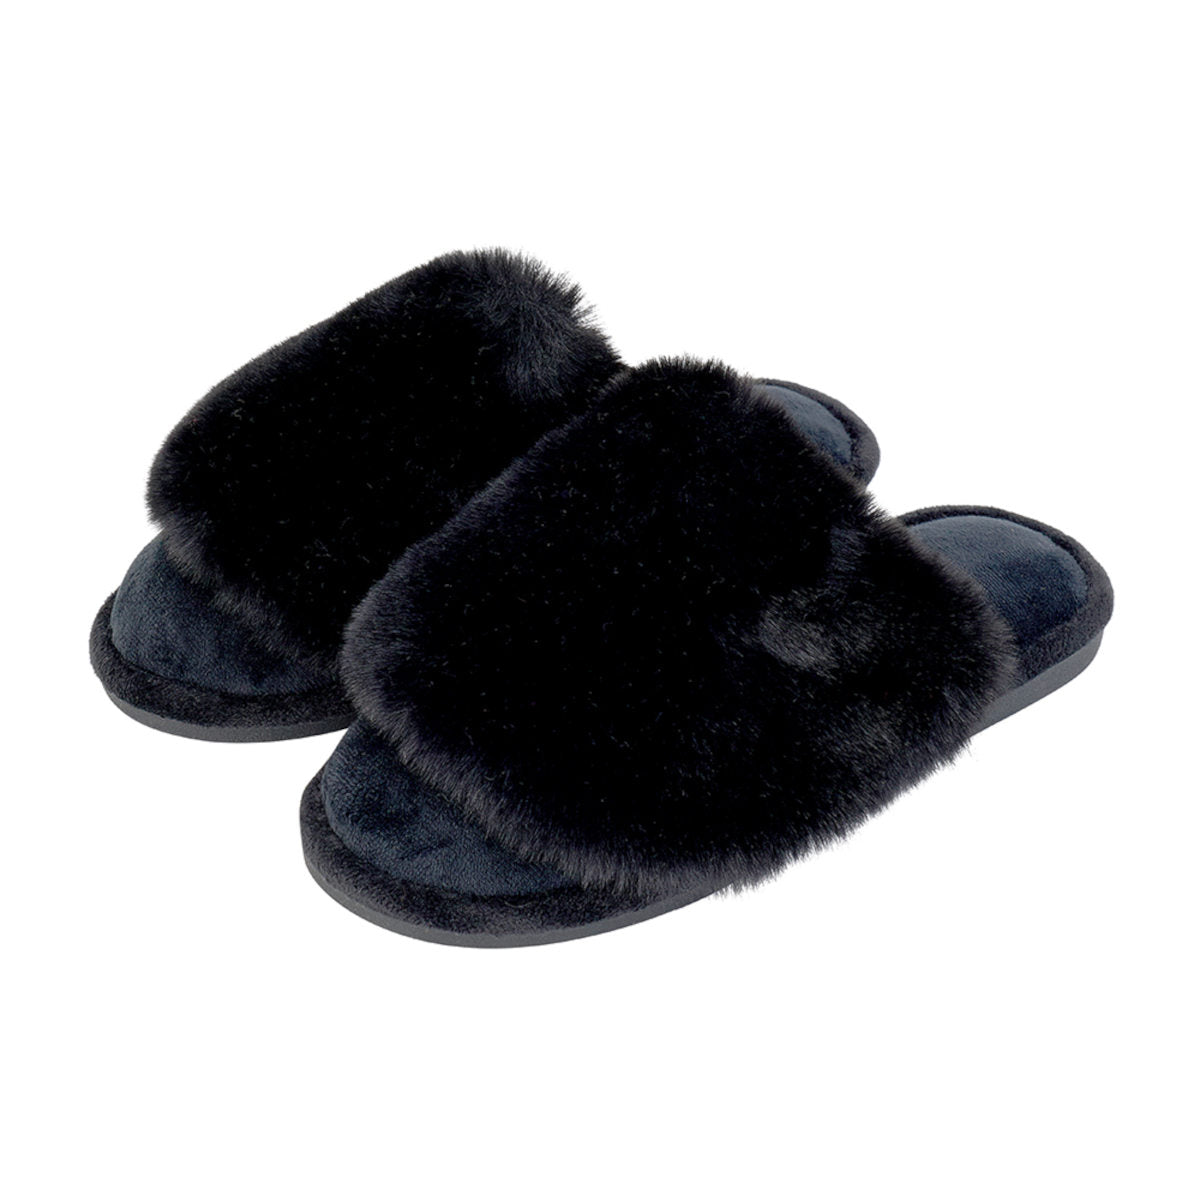 Cozy Slippers - Details Shoes & Accessories